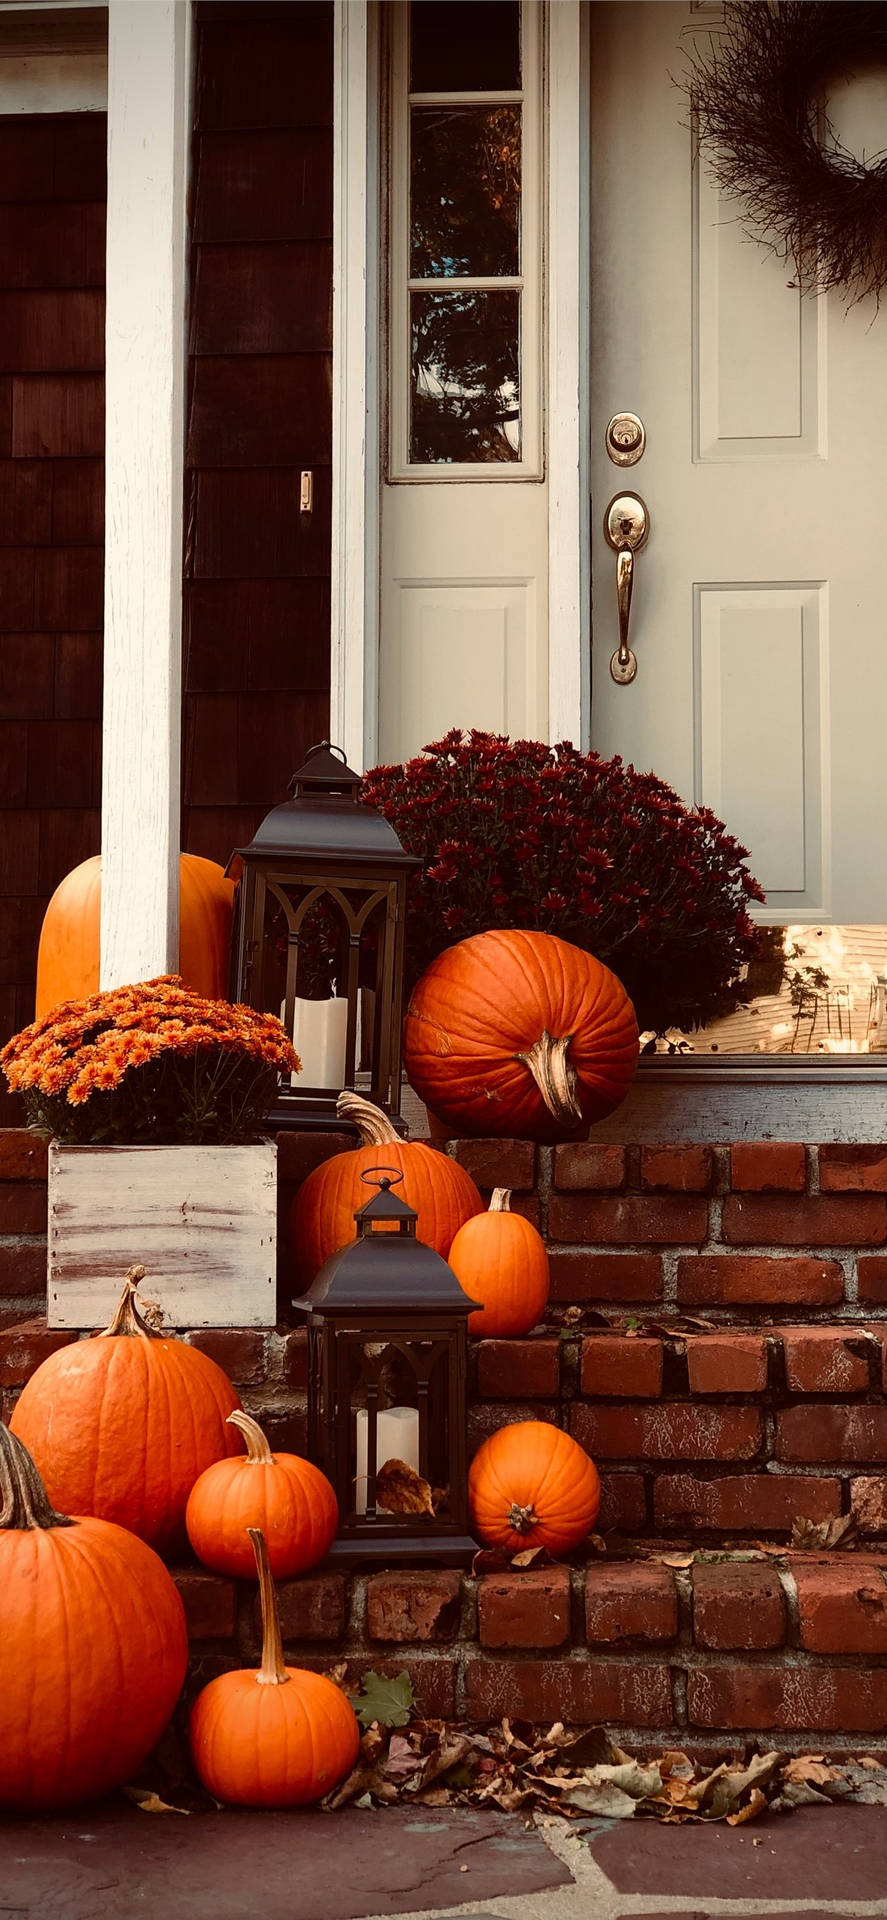 Pumpkins By The Doorstep Thanksgiving Iphone Background